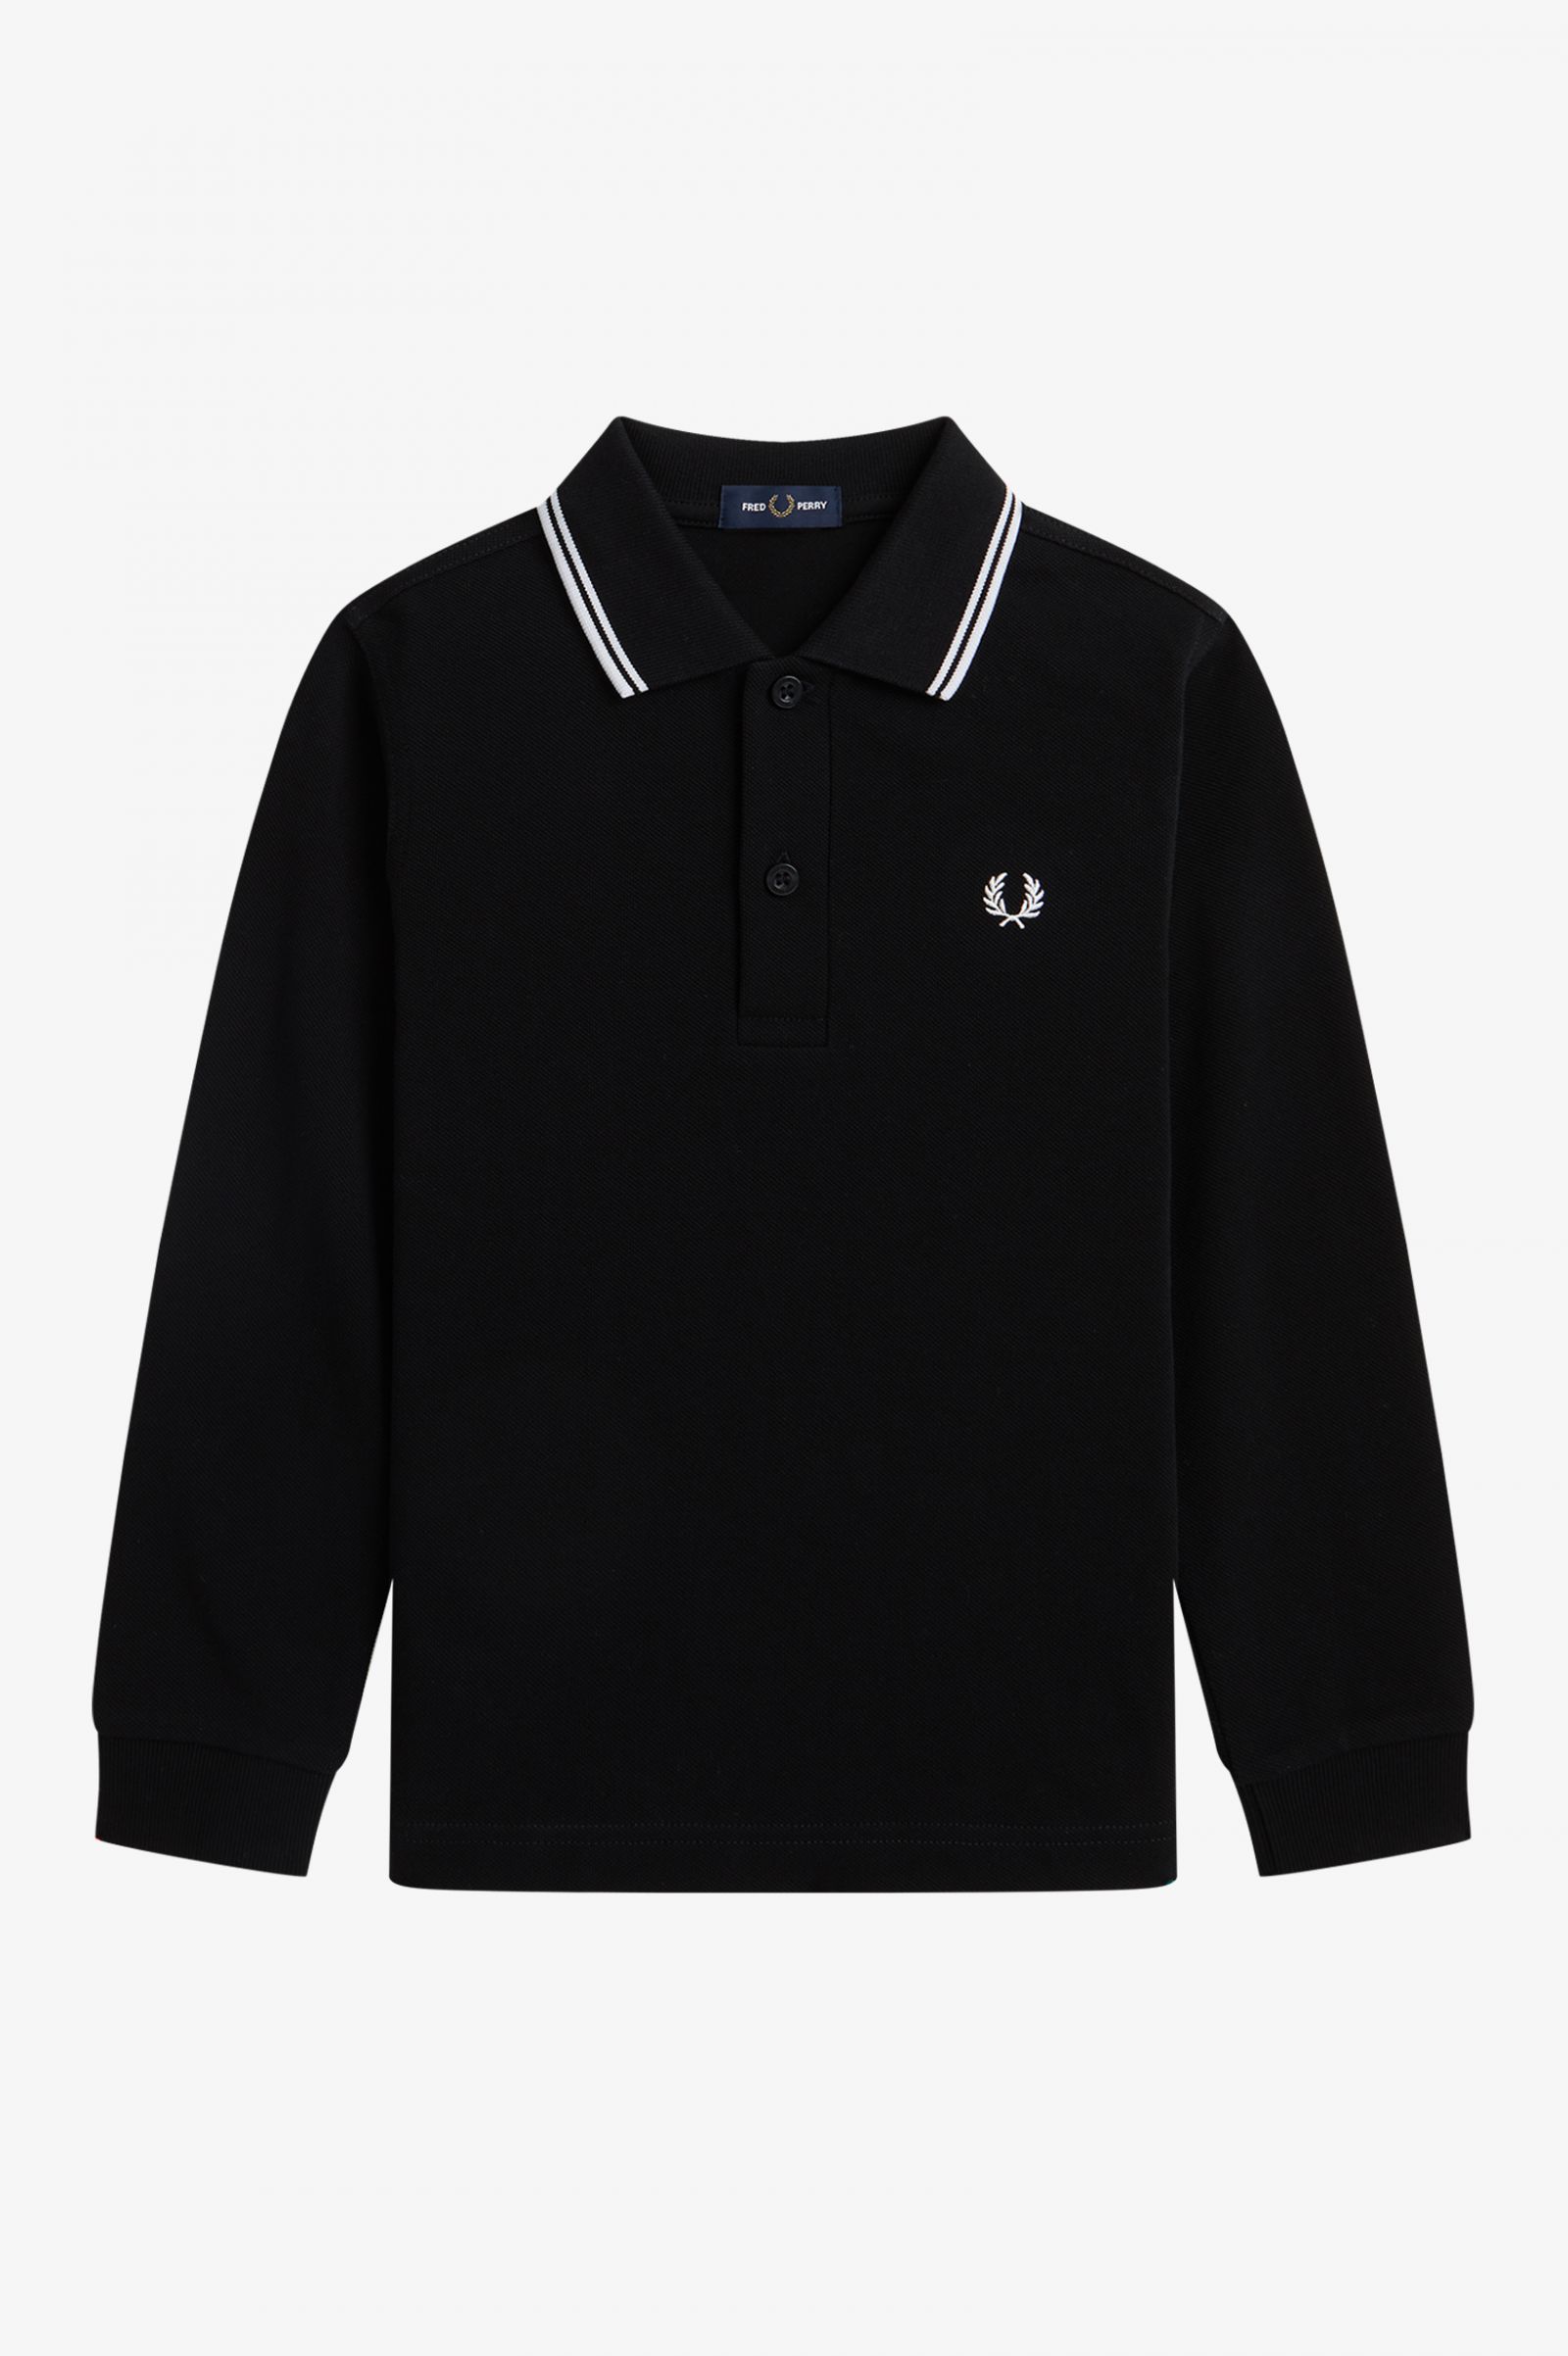 Kids Long Sleeve Twin Tipped Fred Perry Shirt - Black / White / White ...